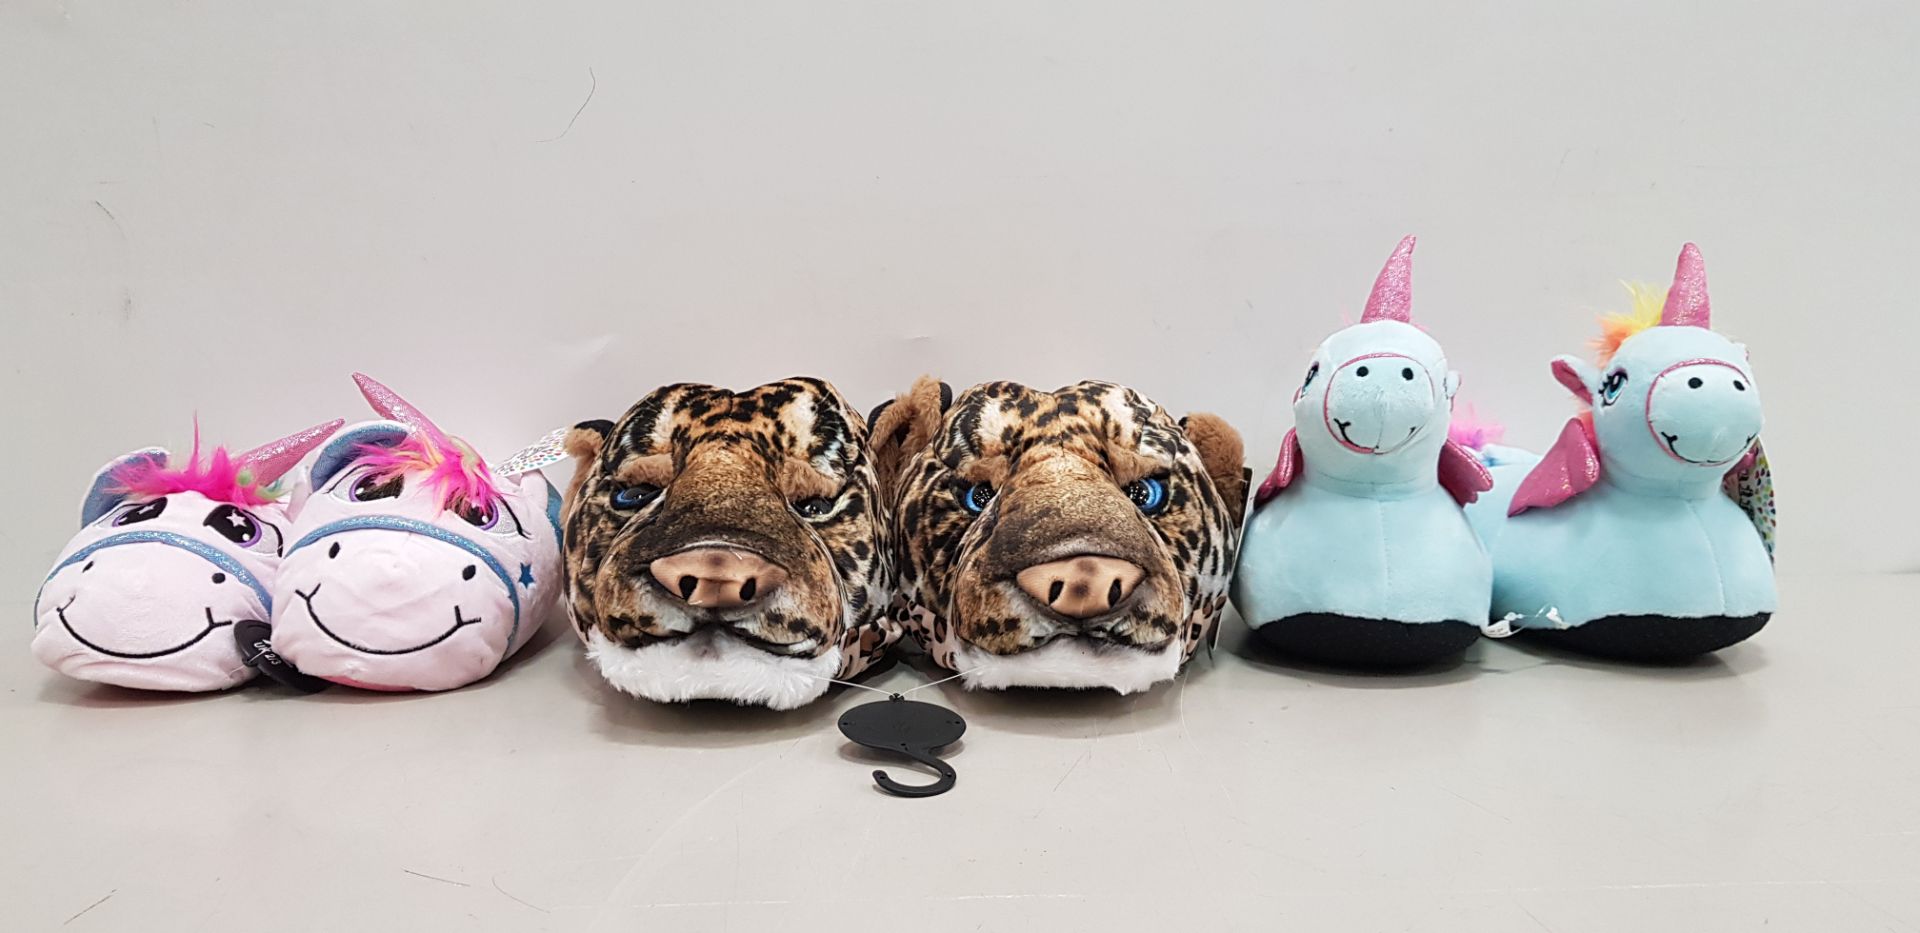 30 X BRAND NEW NIFTY KIDS UNICORN / TIGER / 3D SLIPPERS - IN MIXED COLOURS - IN MIXED SIZES TO